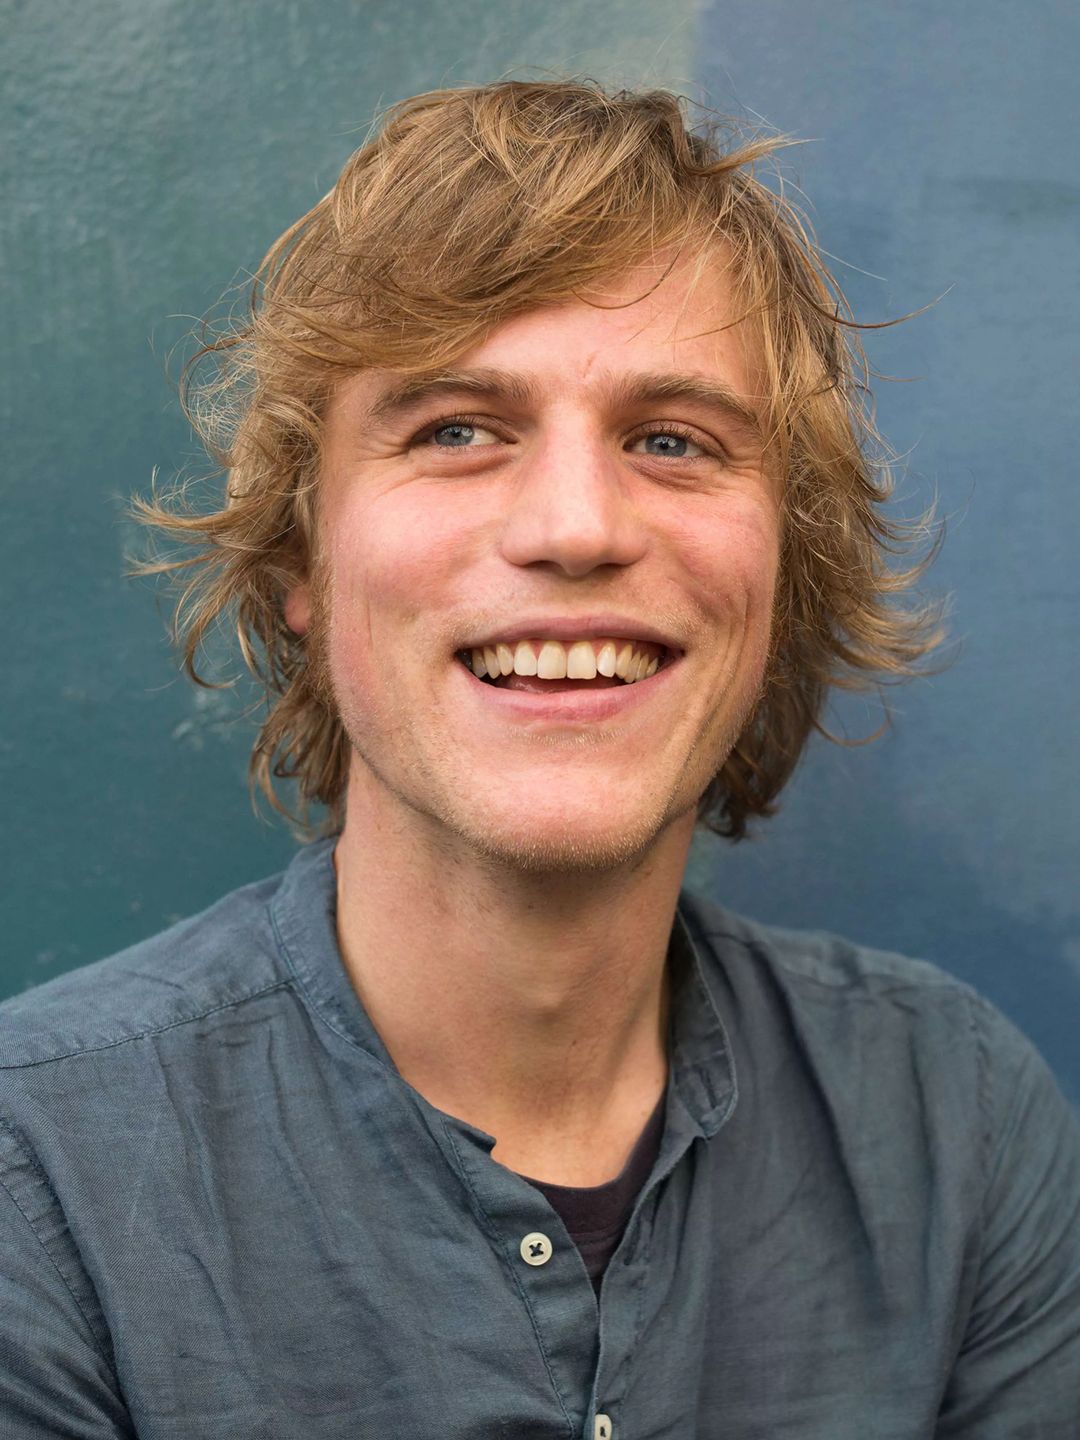 Johnny Flynn who is his father